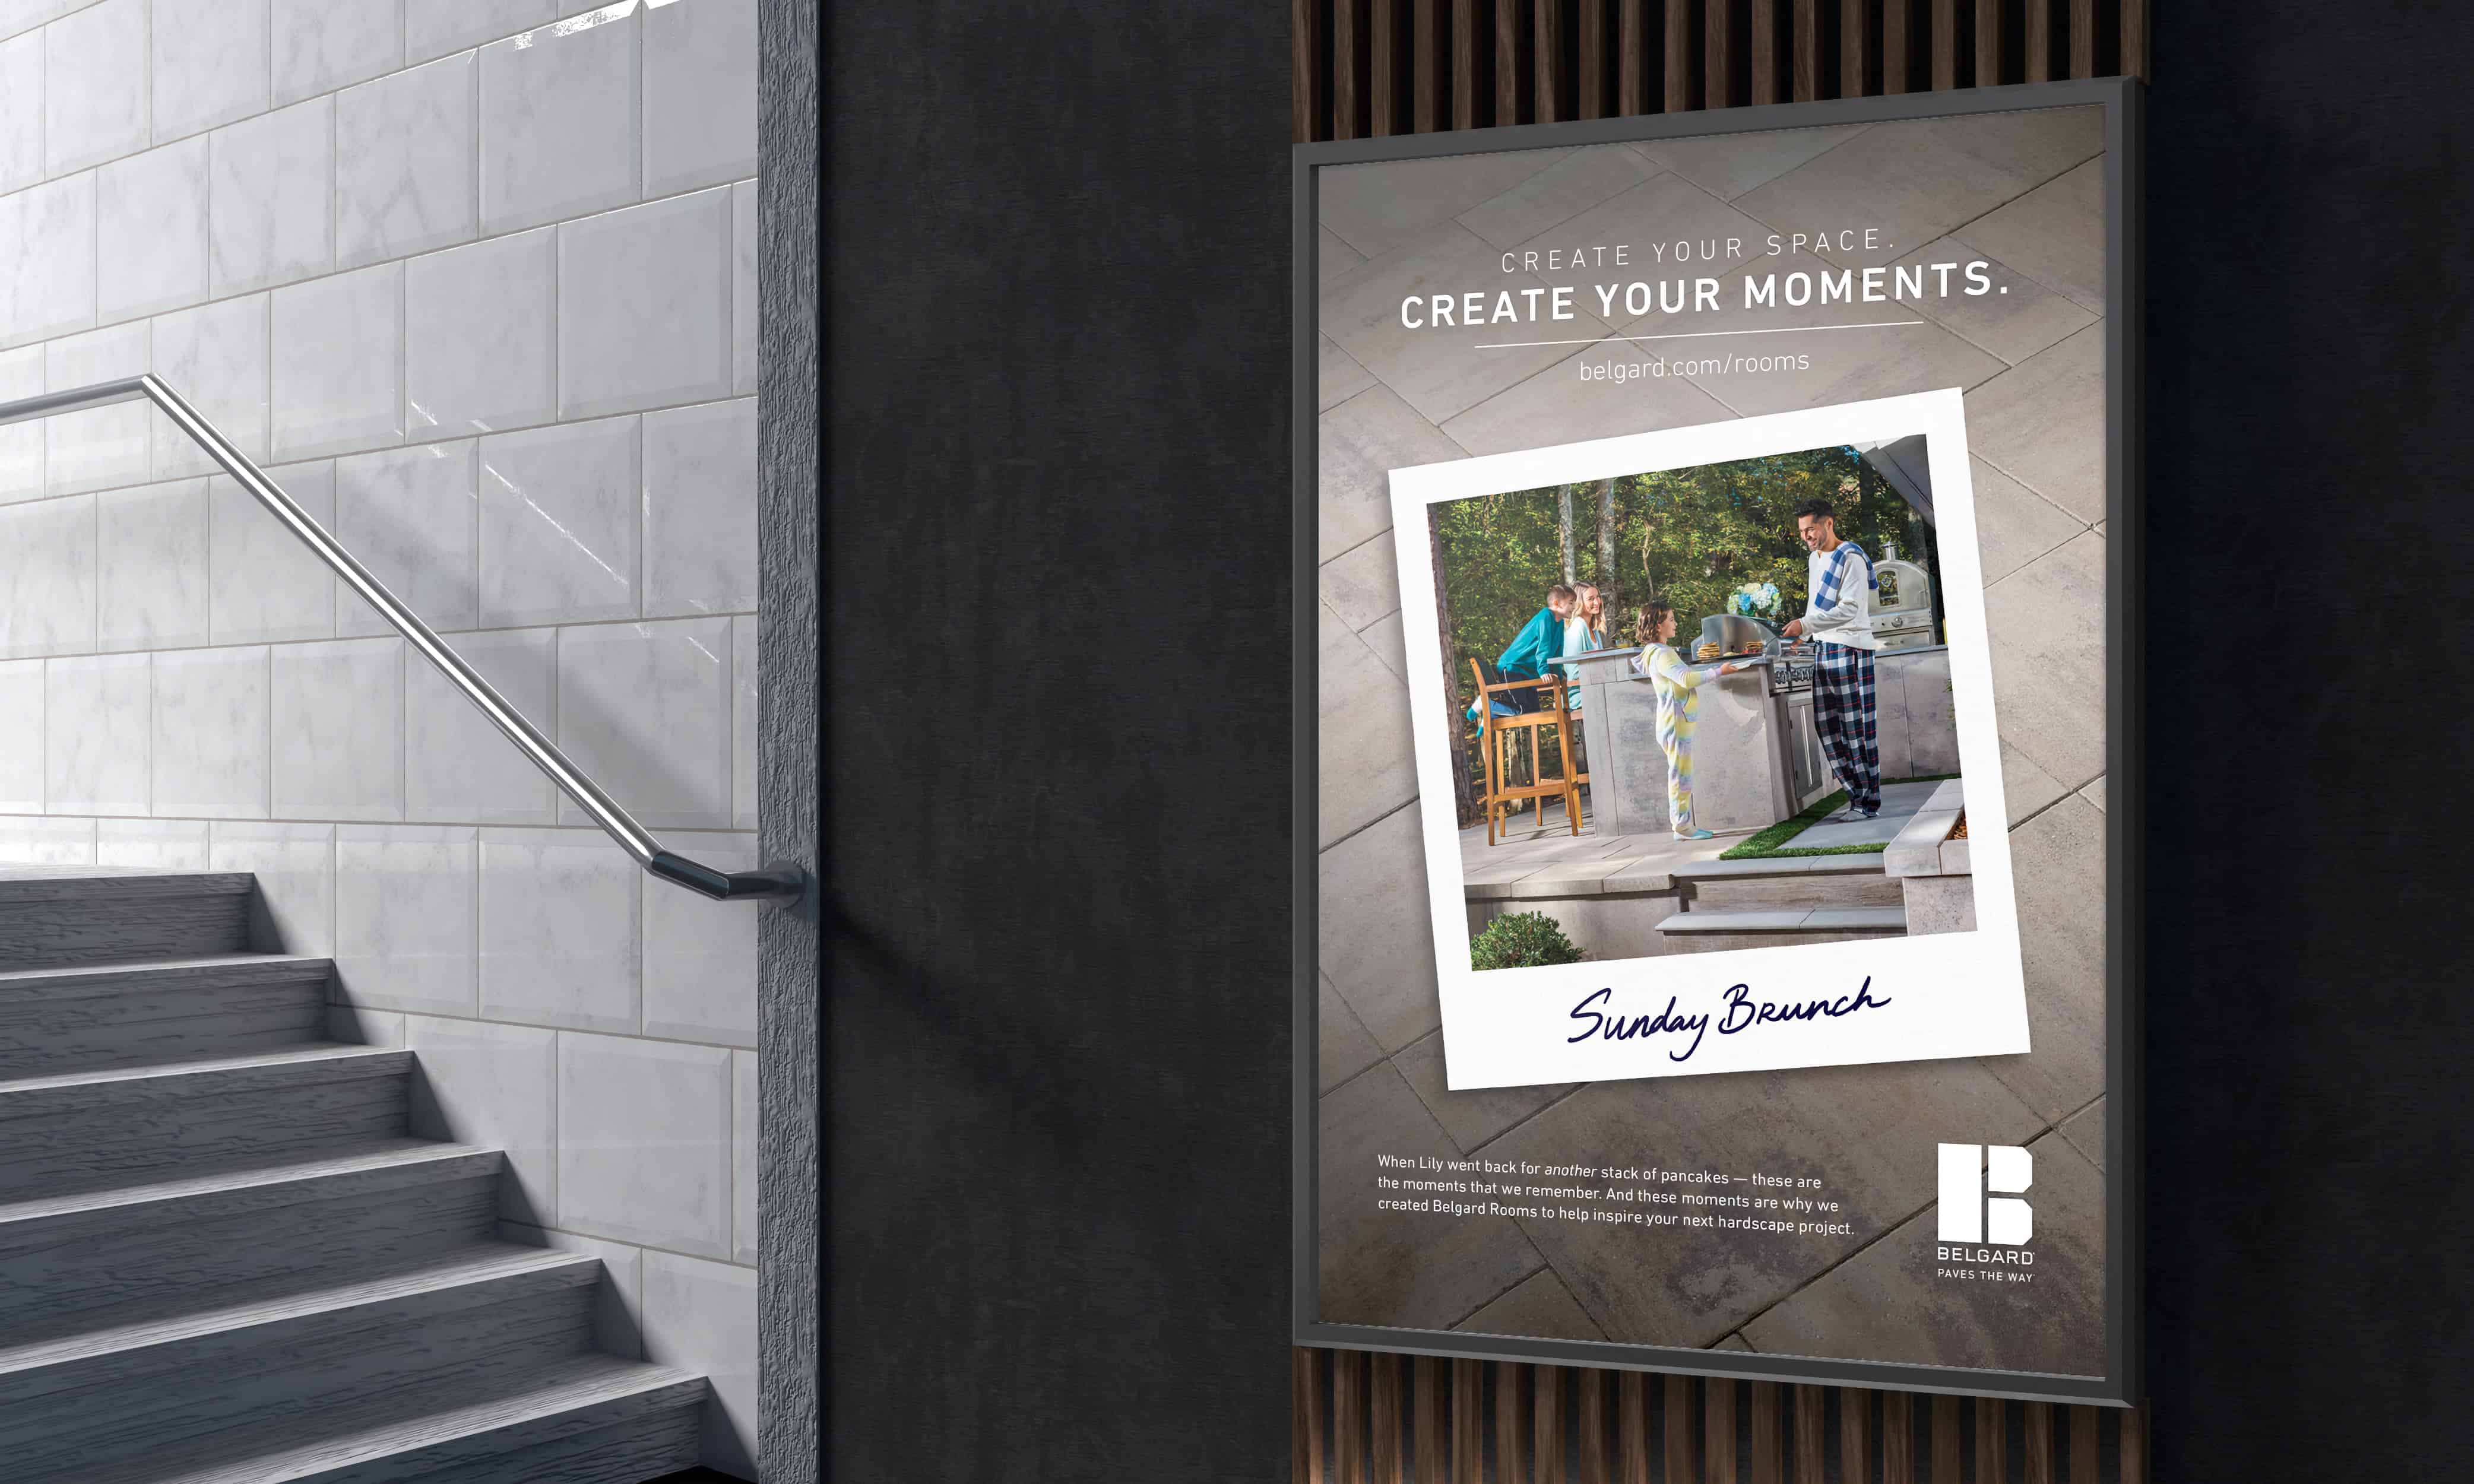 Belgard Rooms print ads that say "Sunday Brunch"